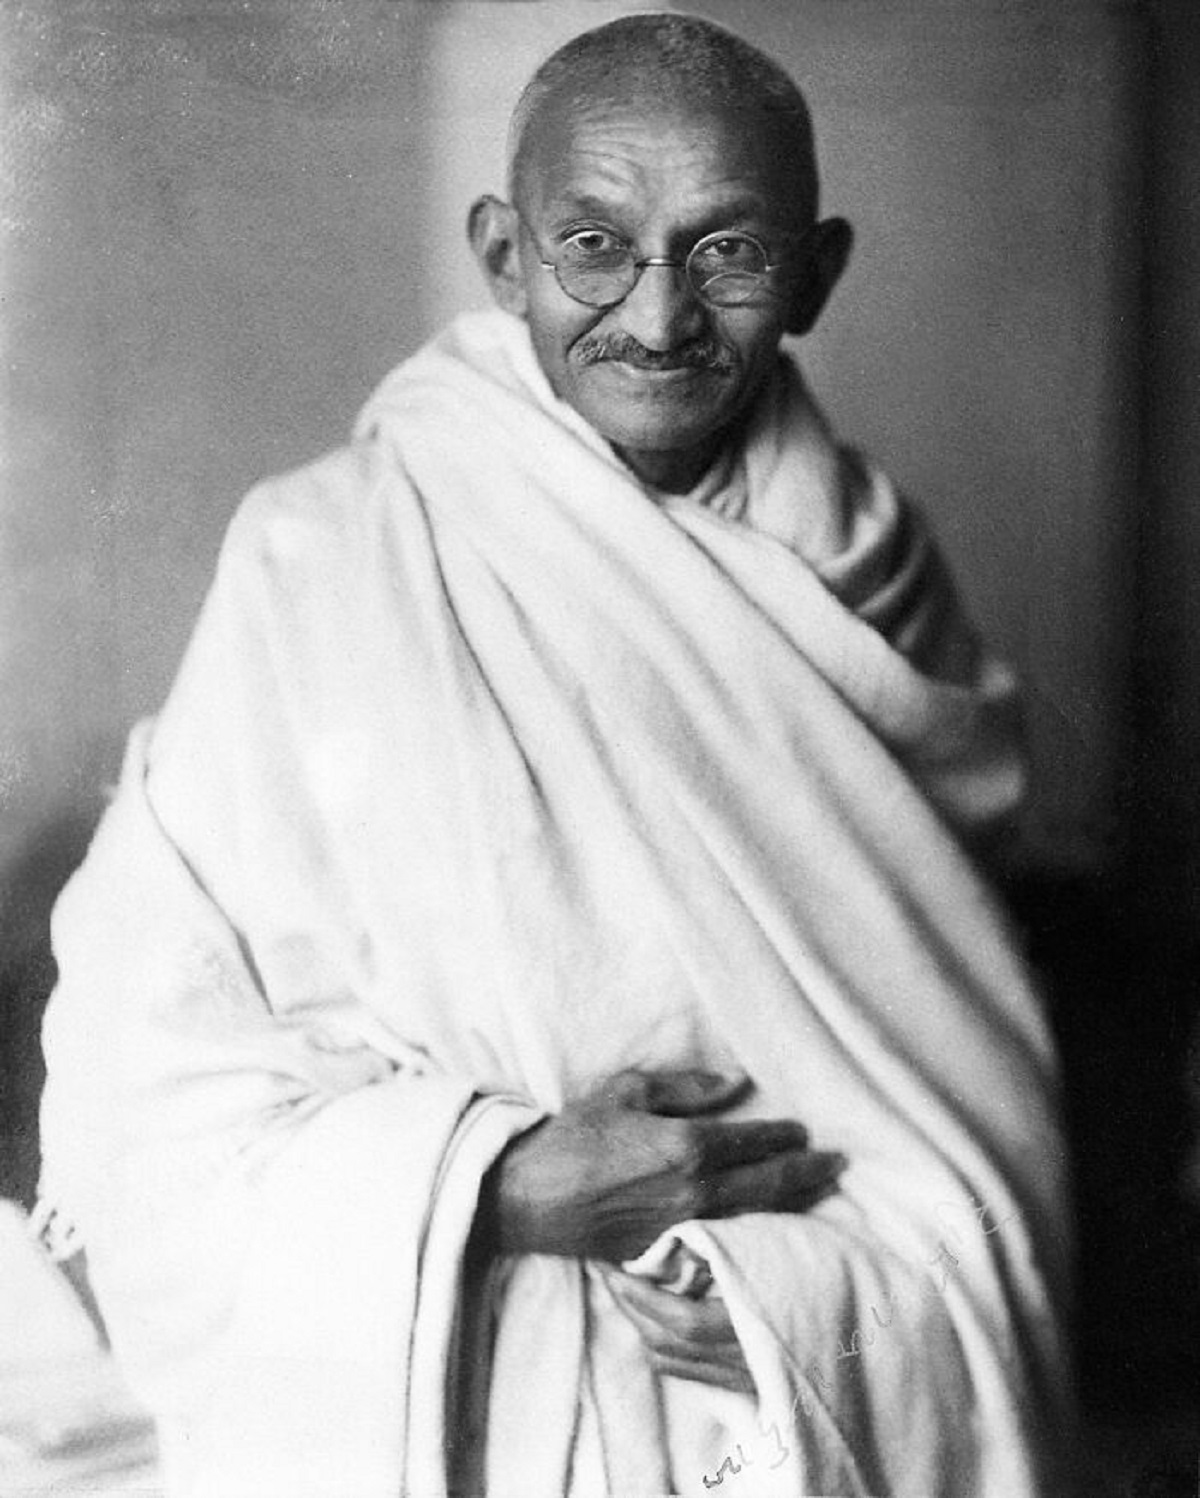 Gandhi arrived in London right before Jack the Ripper started his k*lling spree and there were no more murders after he left. He can't be ruled out as a suspect.